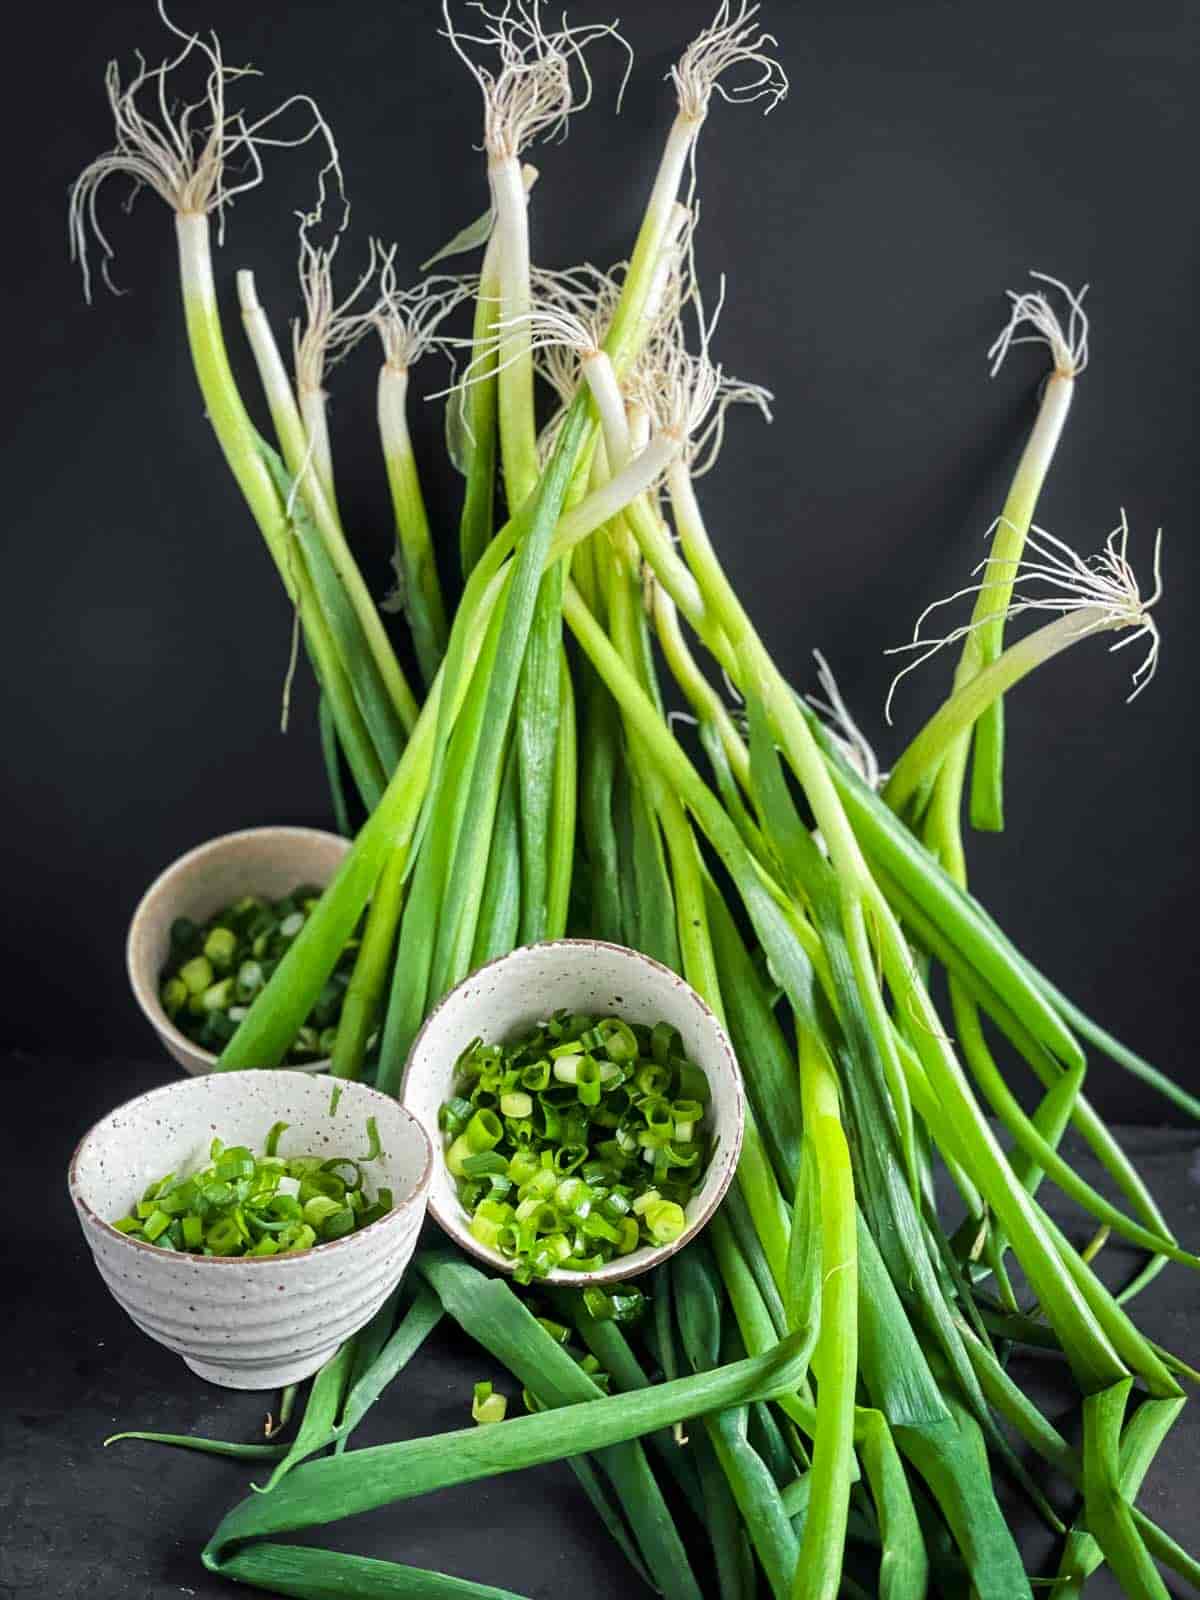 3 bowls of chopped scallions against a backdrop of whole scallions